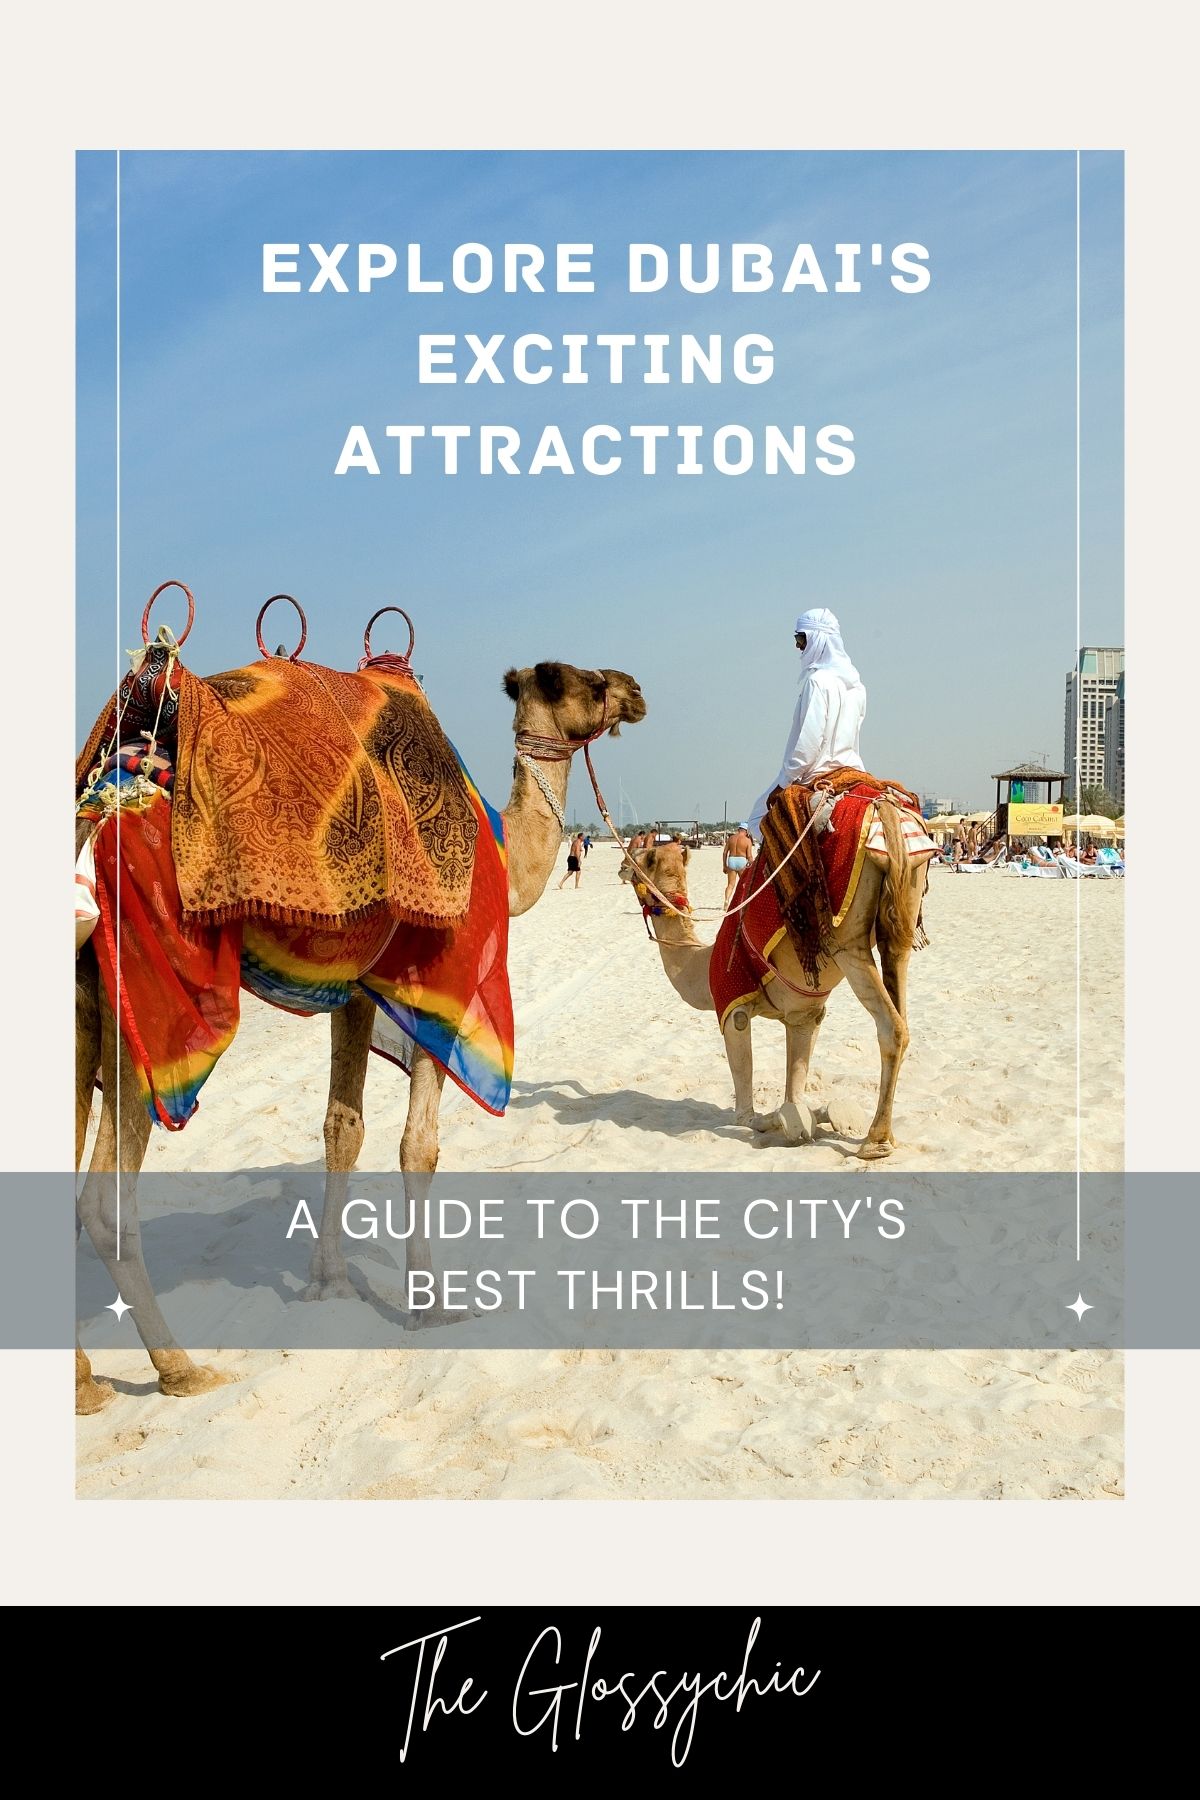 Explore Dubai's Exciting Attractions: A Guide To The City's Best Thrills!